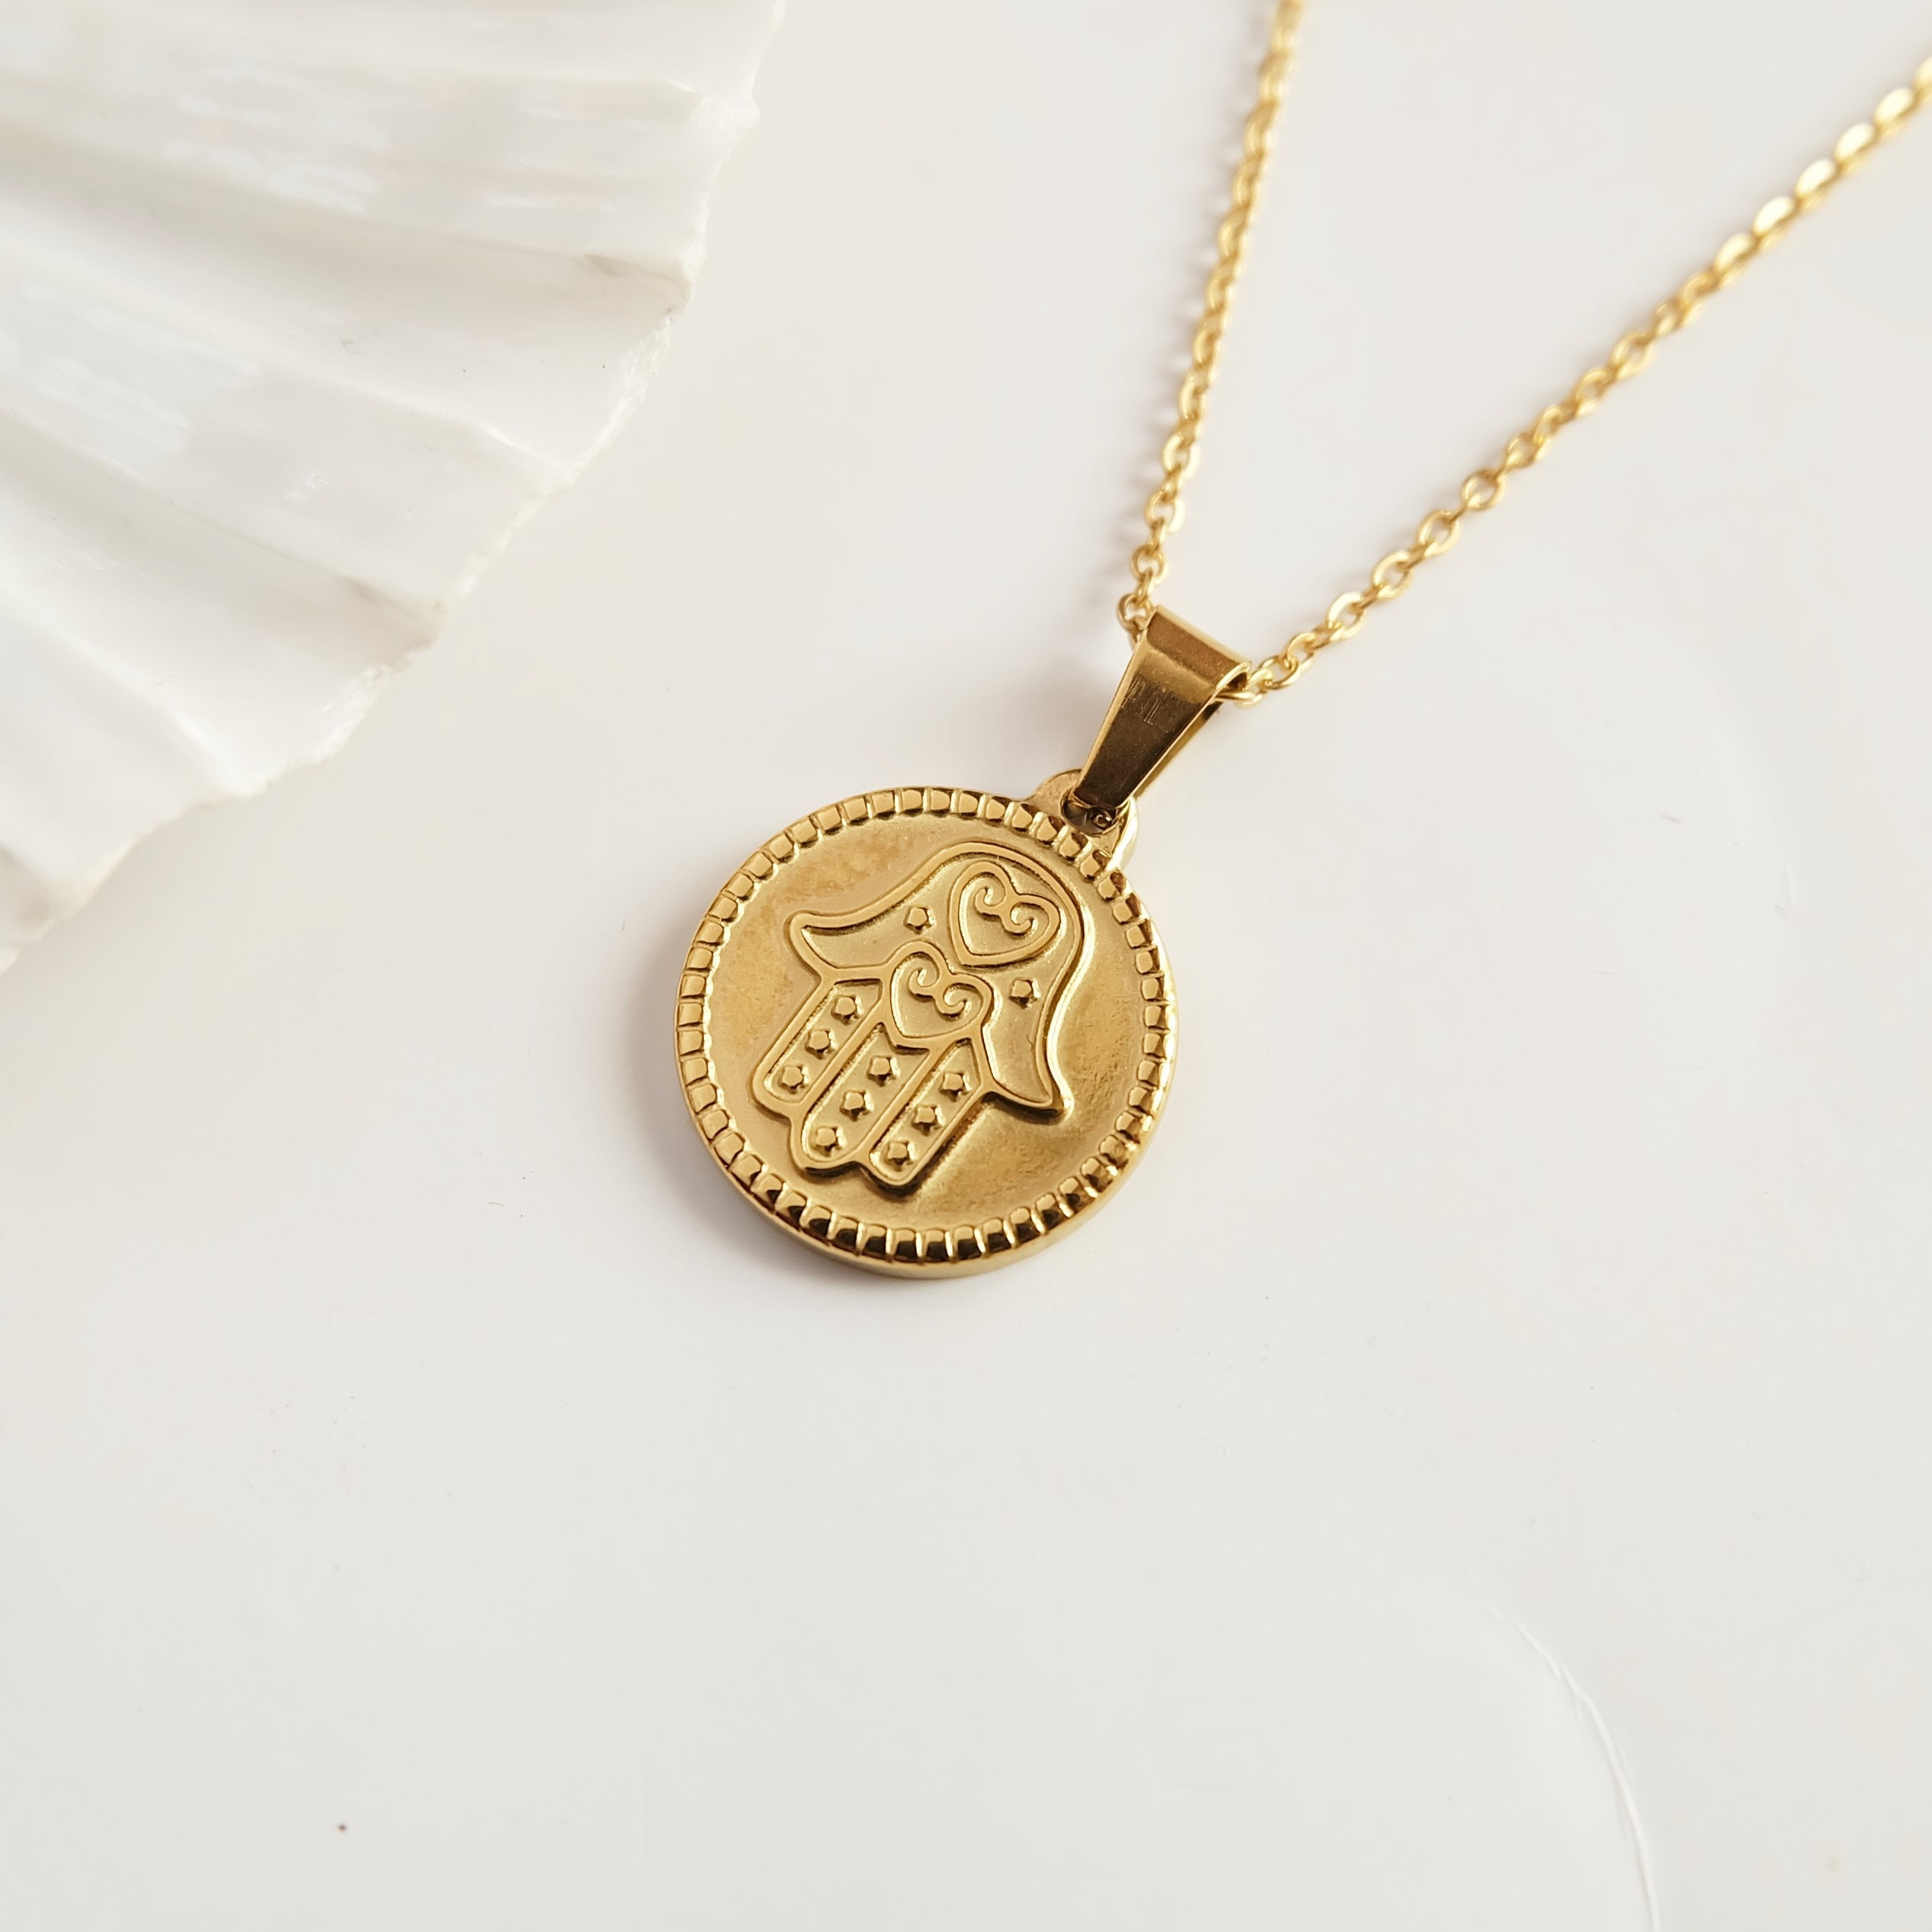  Yheakne Boho Layered Disc Lock Necklace Gold Lock Pendant  Necklace Vintage Coin Necklace Chain Geometric Circle Necklace Chain  Jewelry for Women and Girls : Clothing, Shoes & Jewelry